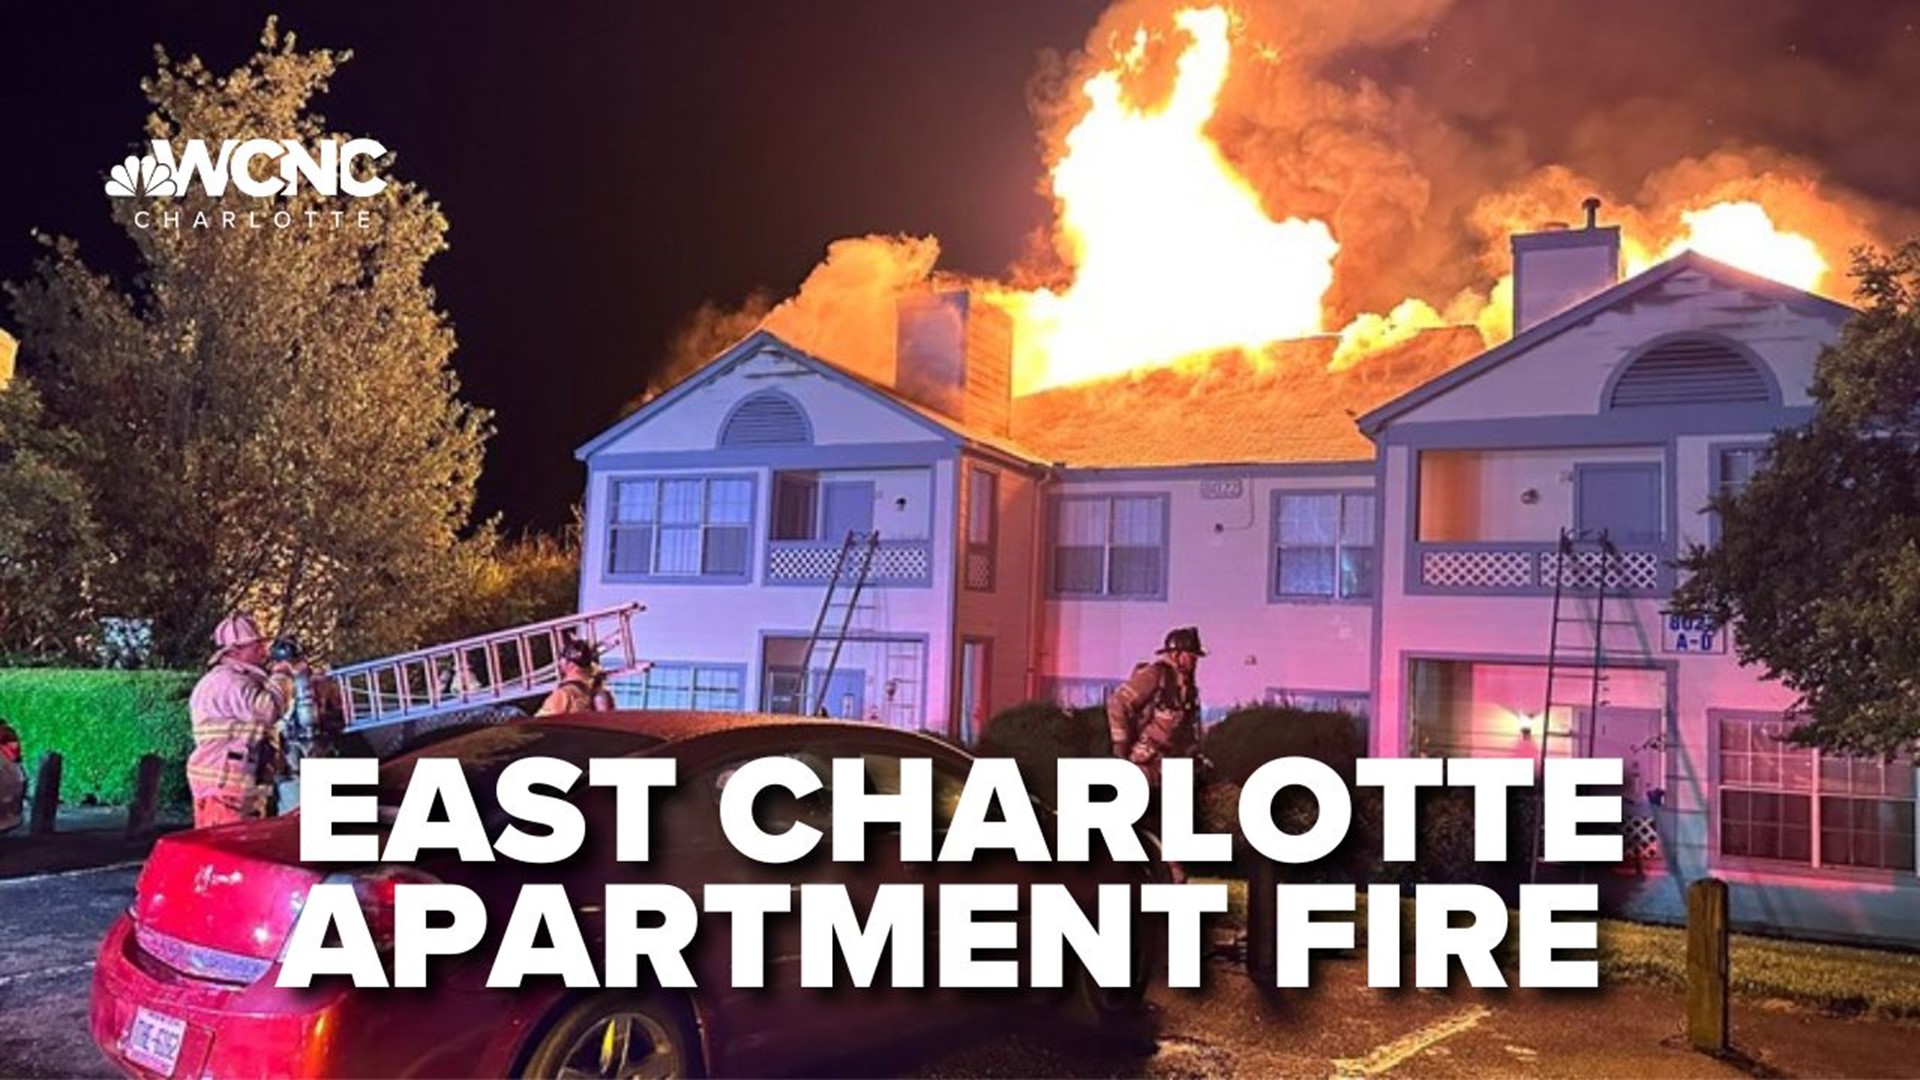 One firefighter sustained minor injuries and no civilians were hurt in the overnight fire.